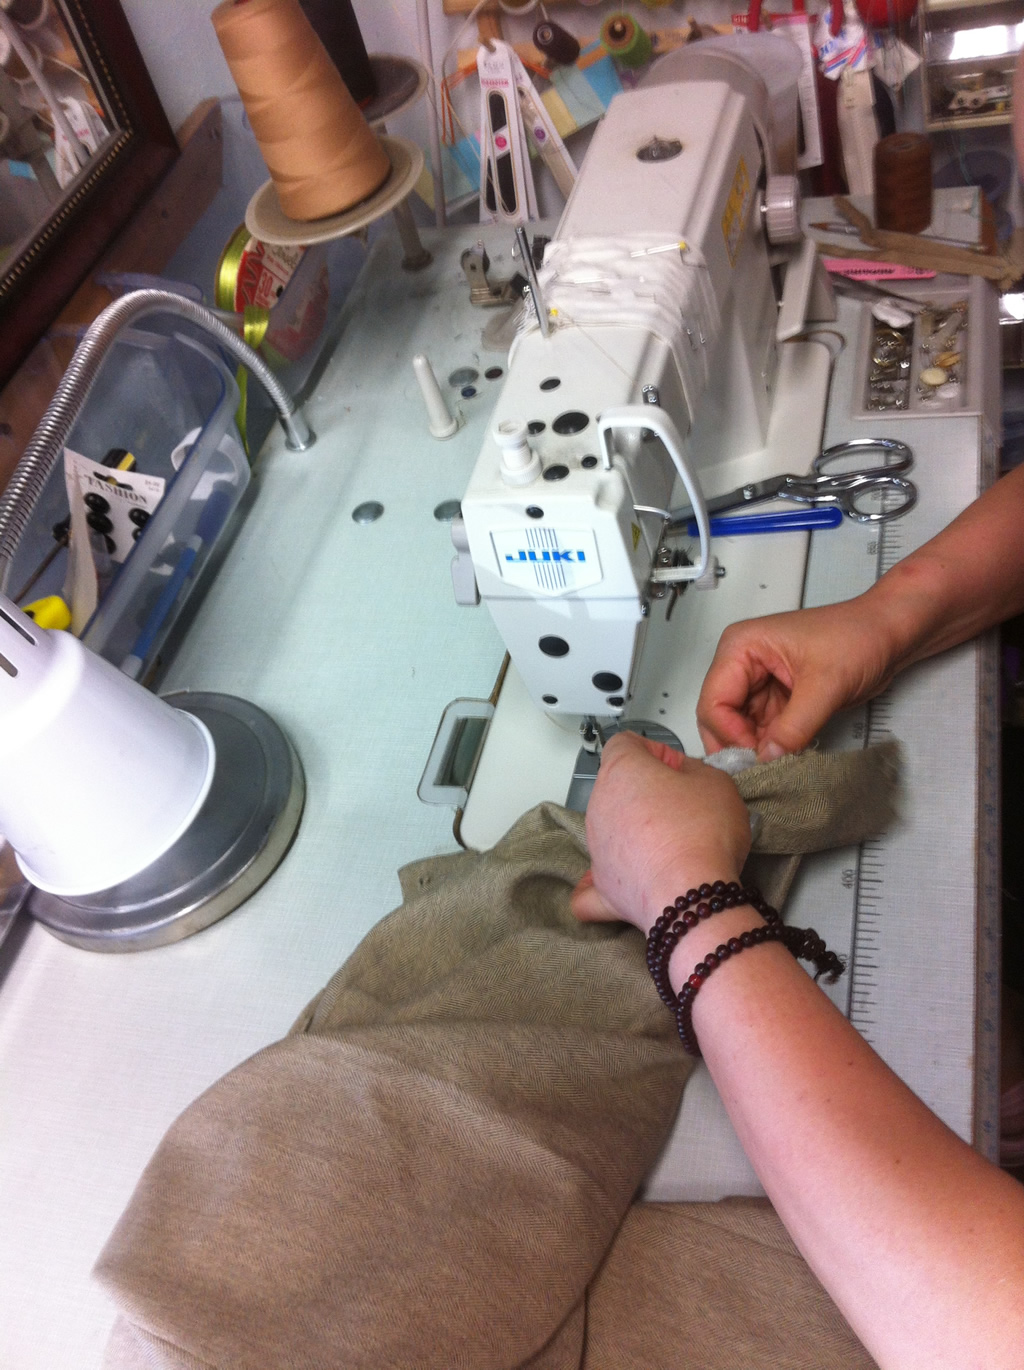 Seamstress and Juki Sewing Machine in Action